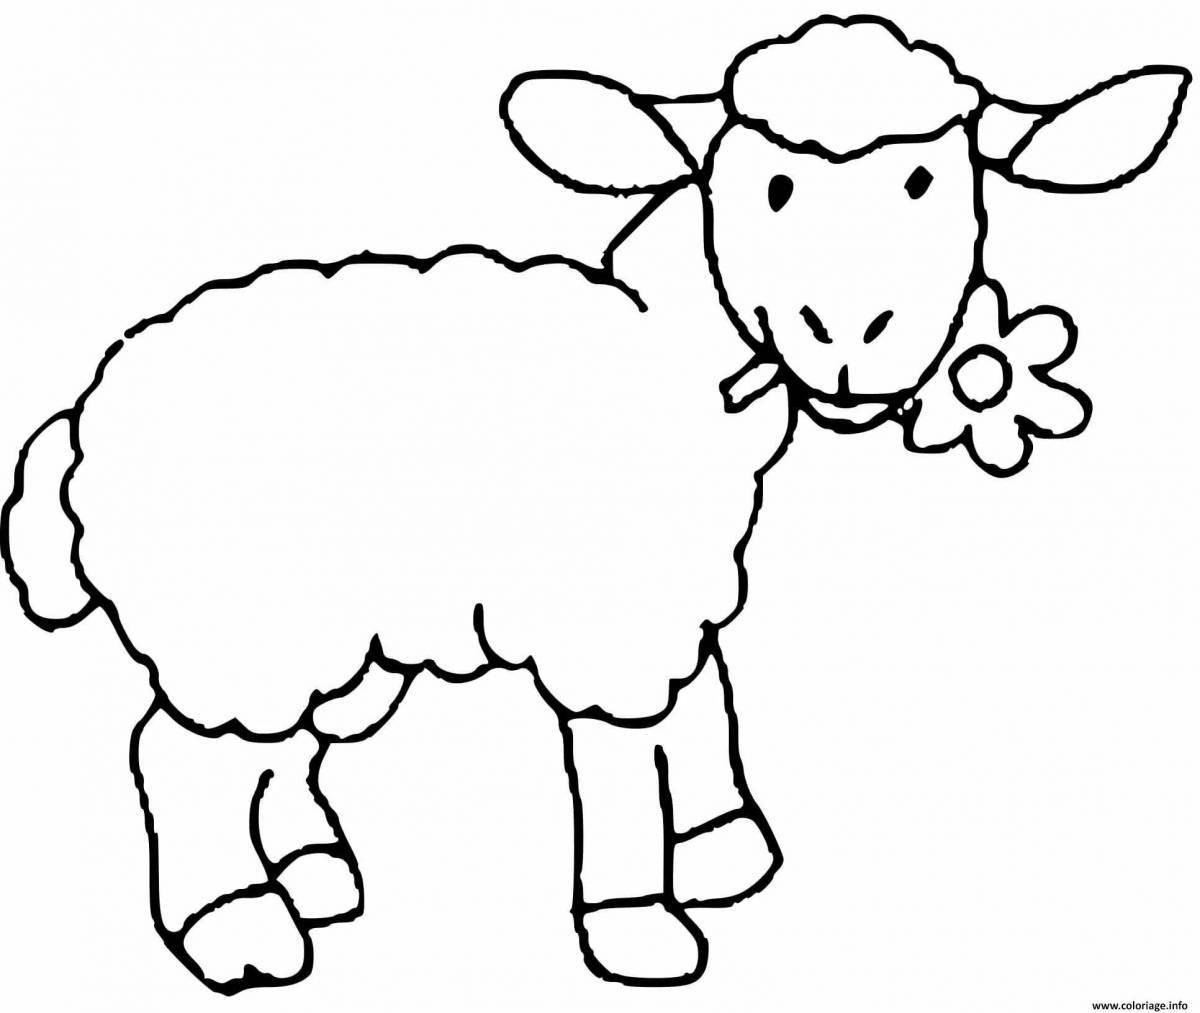 Delightful lamb coloring book for children 2-3 years old